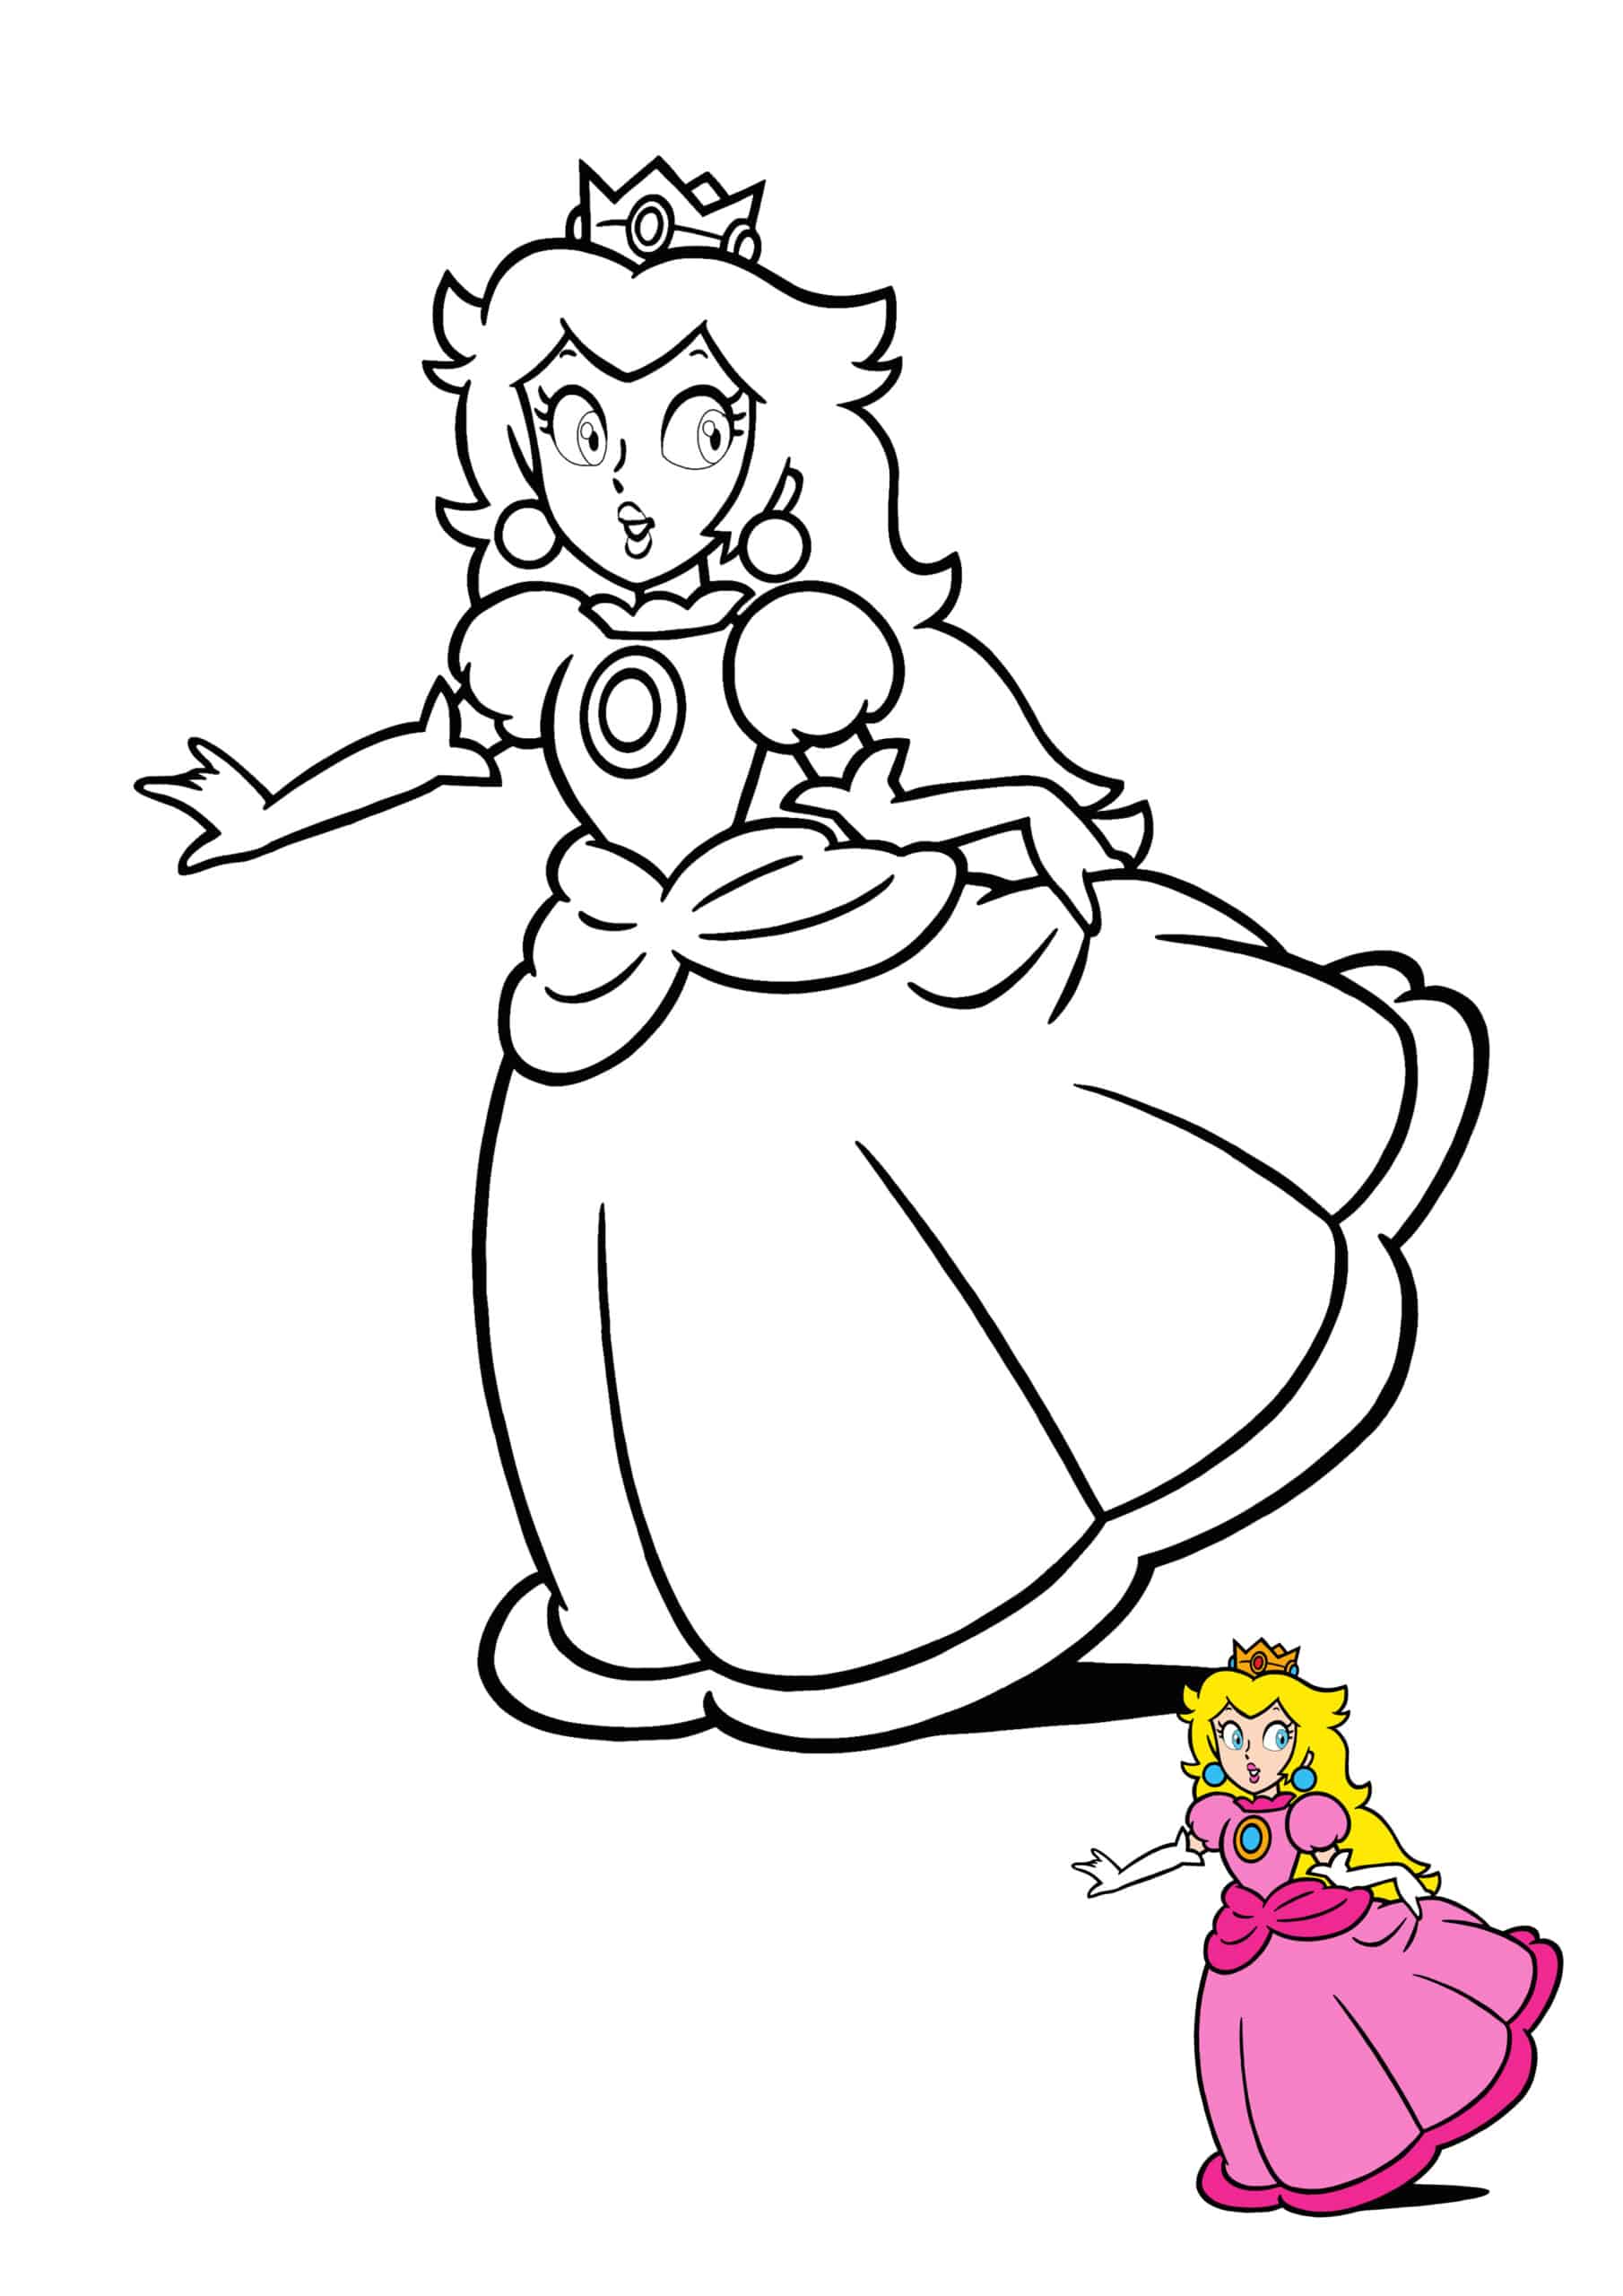 Princess Peach Coloring Pages   Coloring Cool